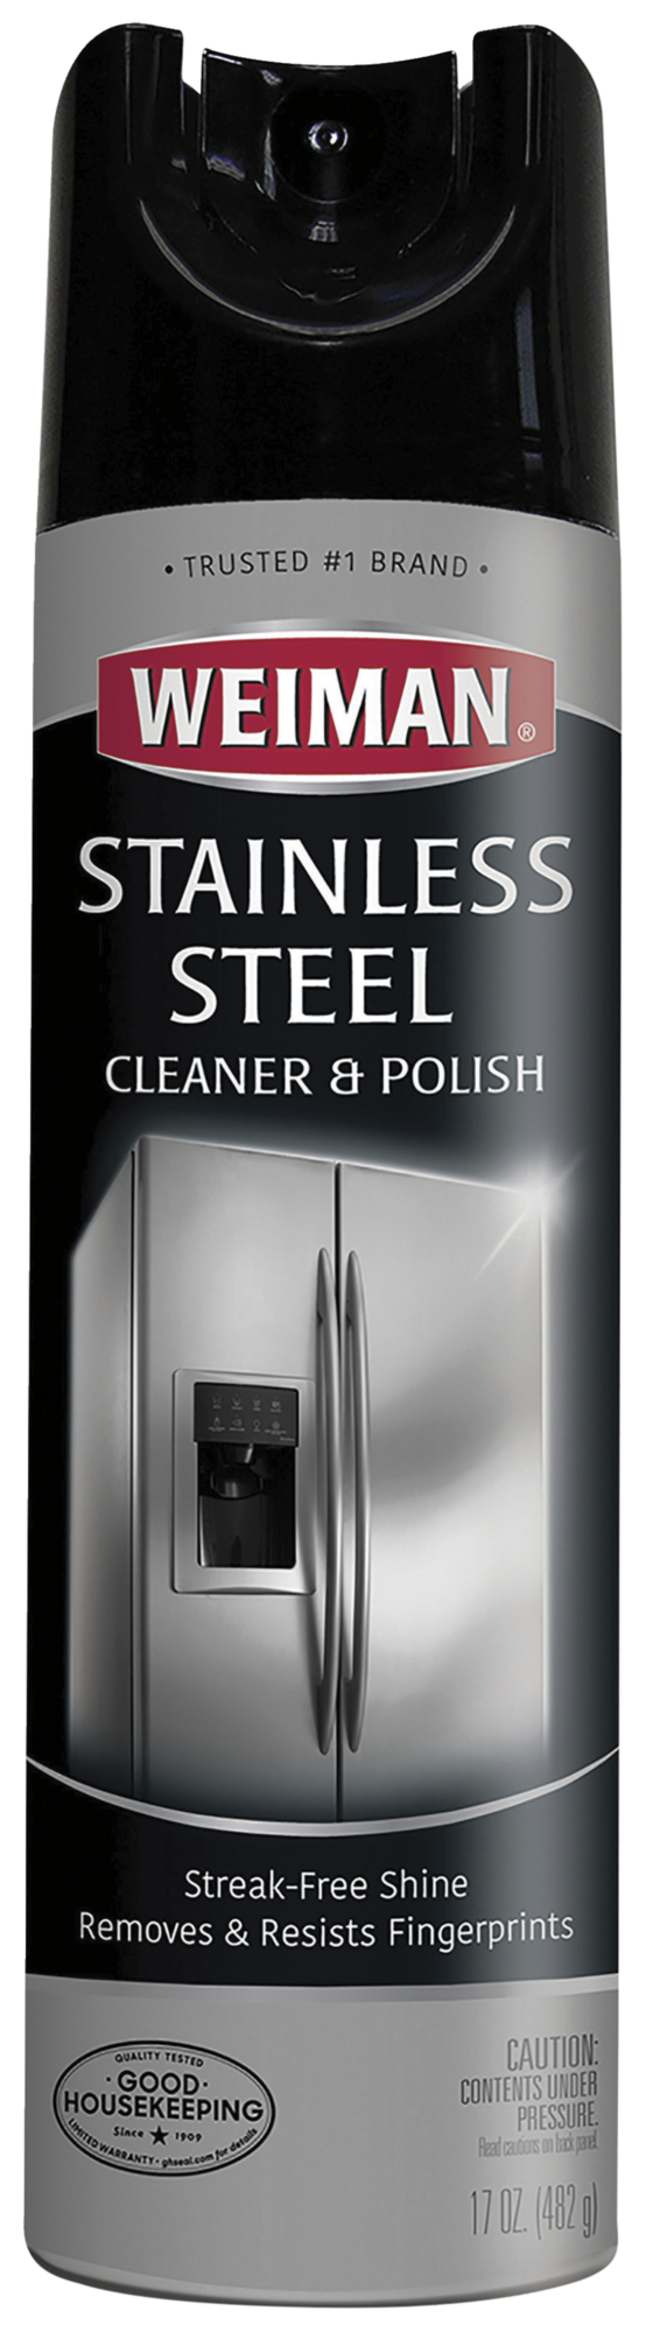 Weiman Products Stainless Steel Cleaner/Polish, Item Number 2027075